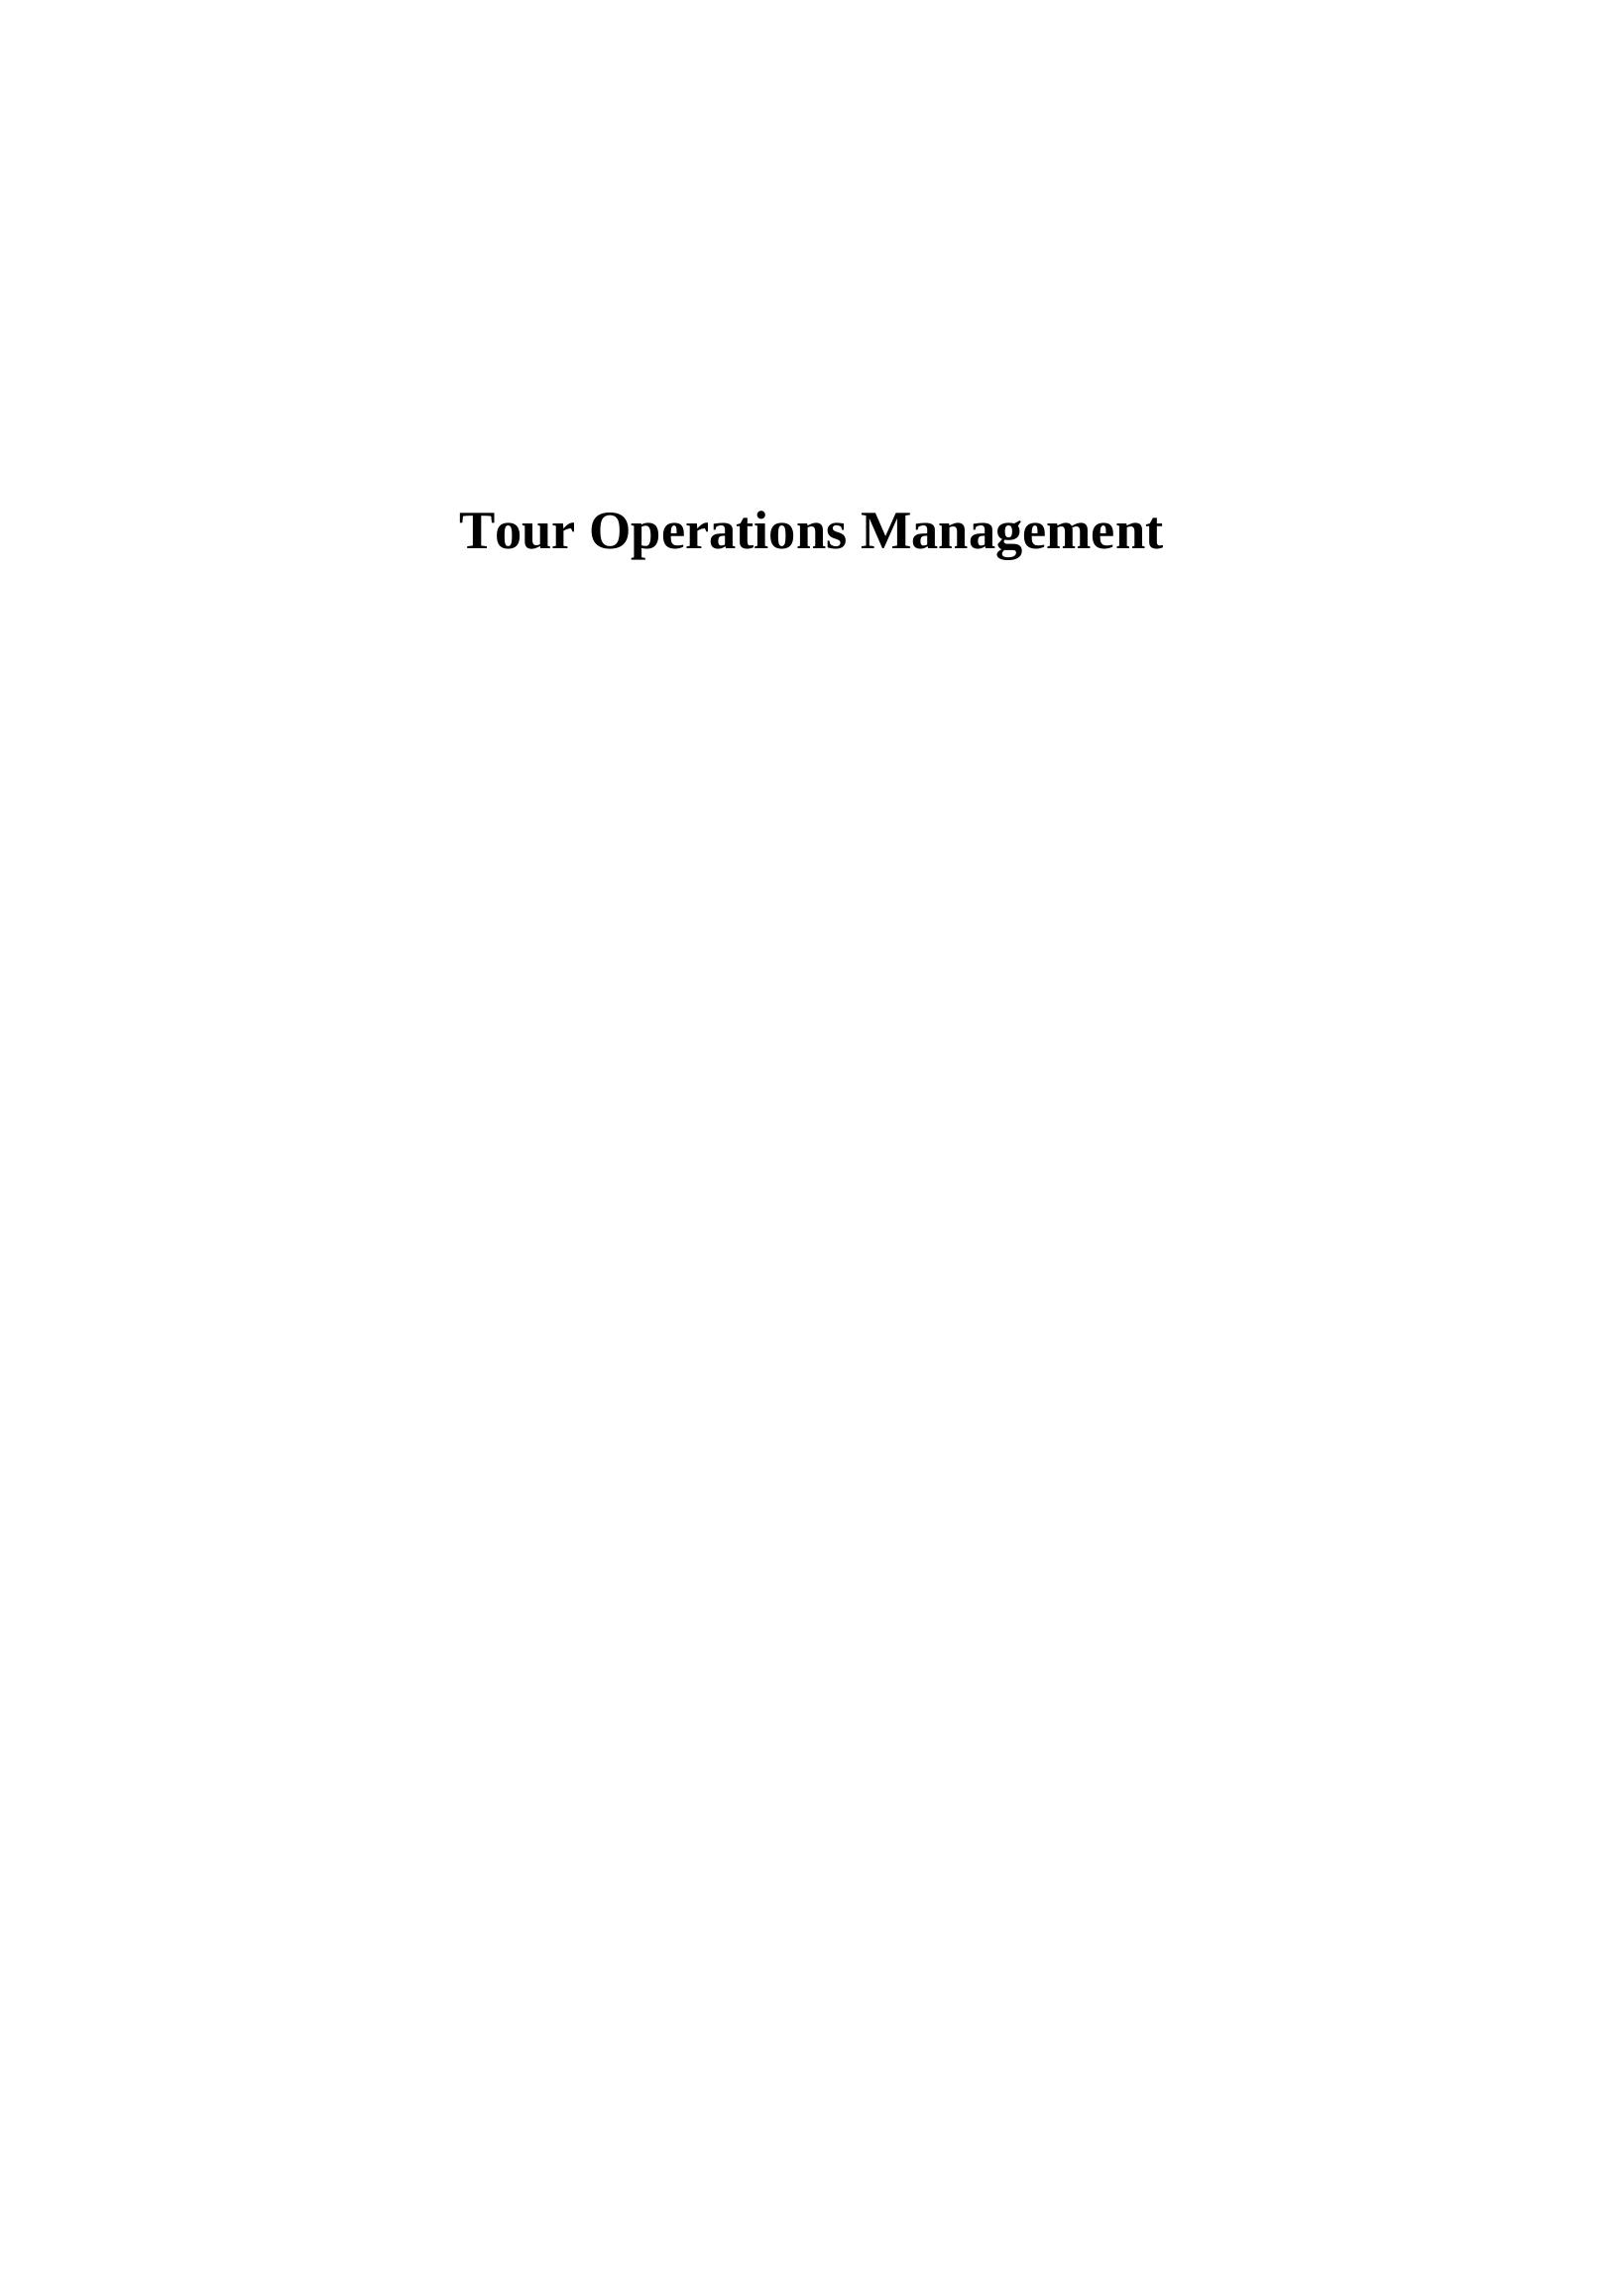 Tour Operations Management TASK 13_1